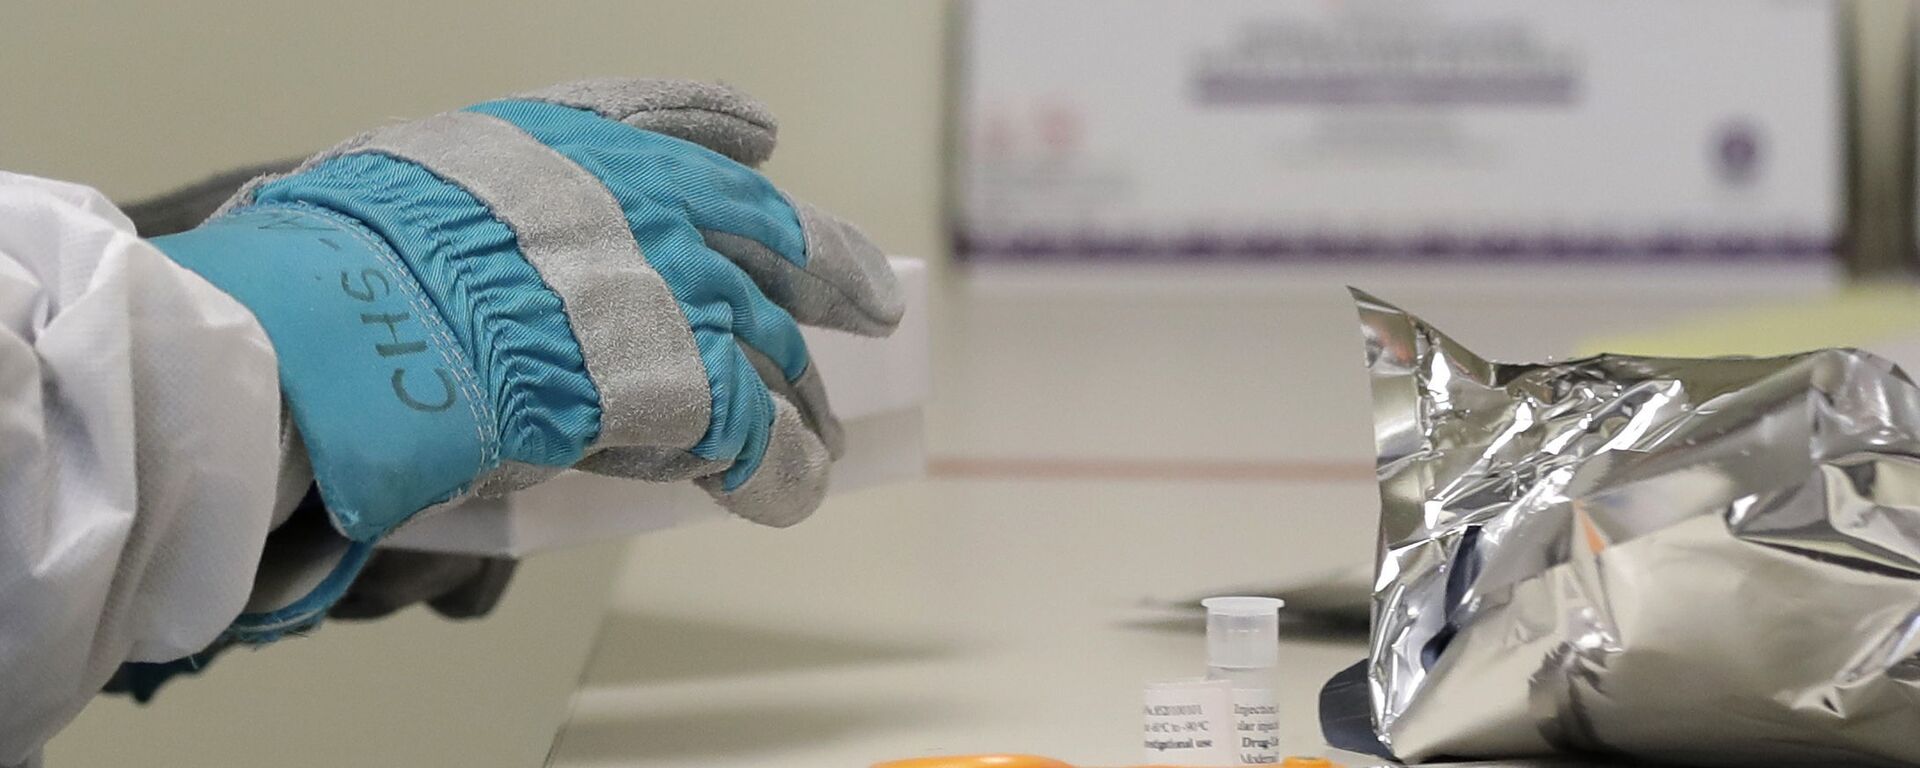 Pharmacist Michael Witte wears heavy gloves as he opens a frozen package of the potential vaccine for COVID-19, the disease caused by the new coronavirus, on the first day of a first-stage safety study clinical trial, Monday, March 16, 2020 - Sputnik International, 1920, 21.07.2020